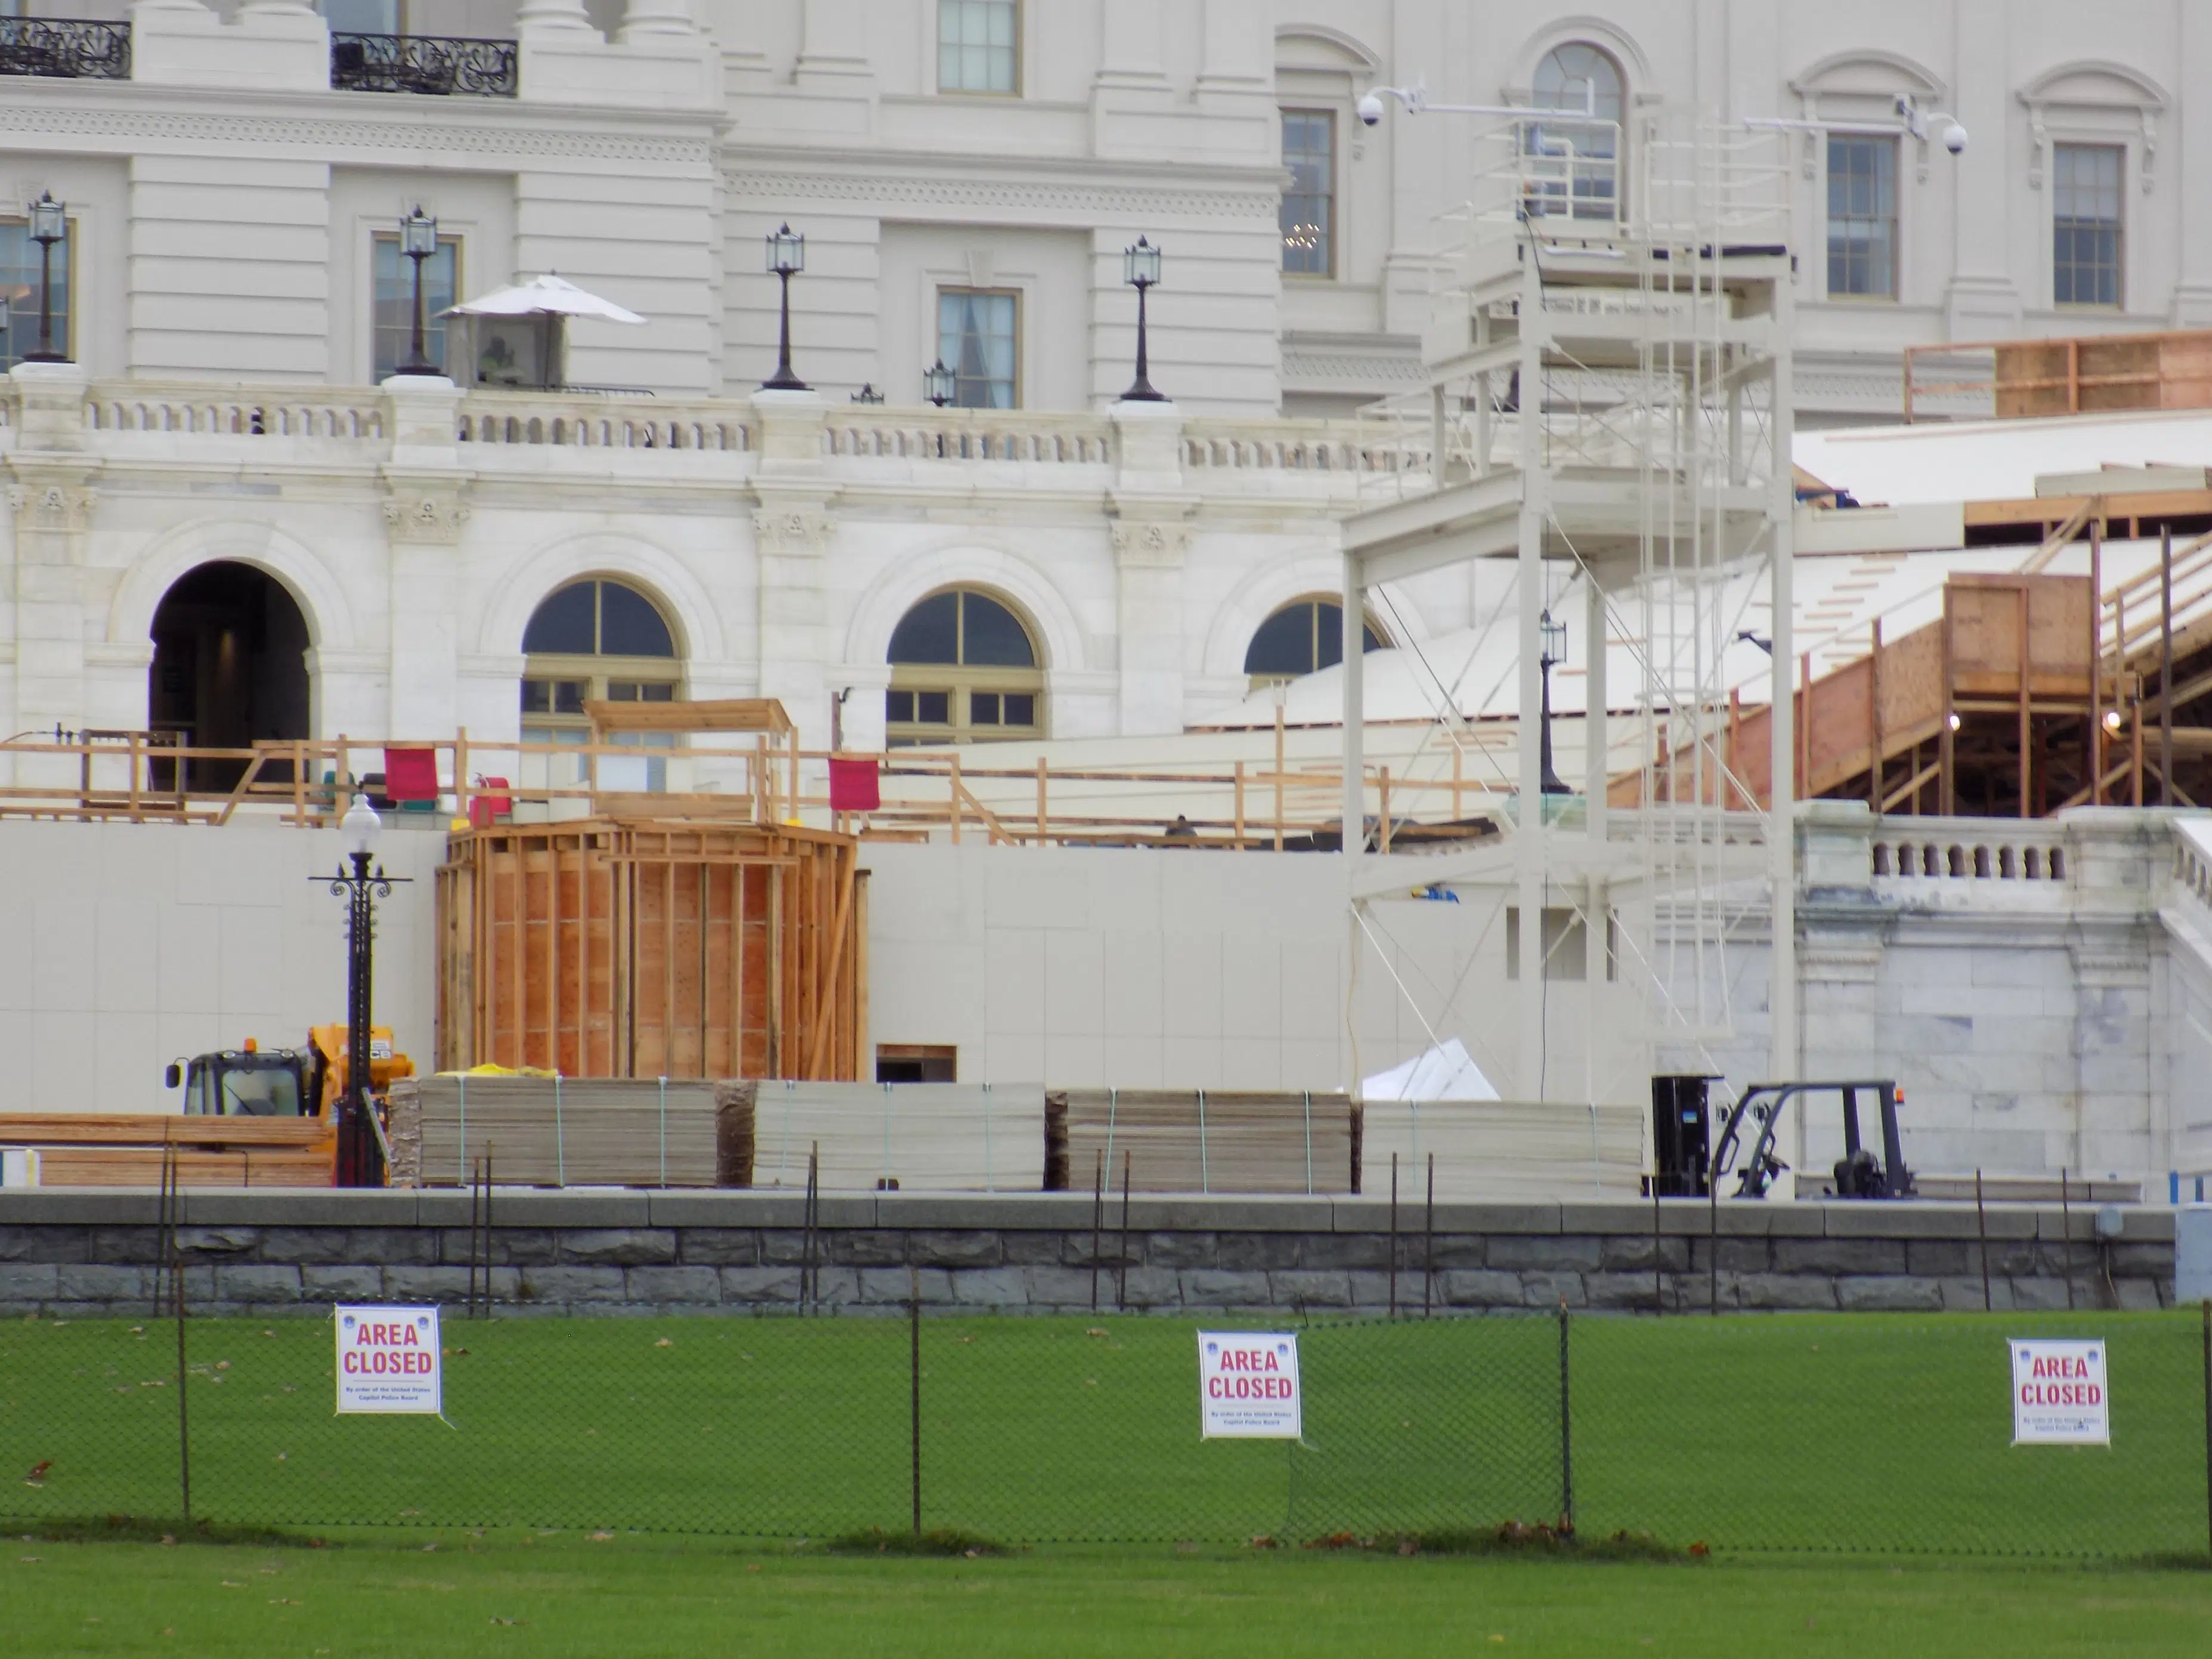 Preparations for Inauguration Continue at Capitol Despite COVID Uncertainty